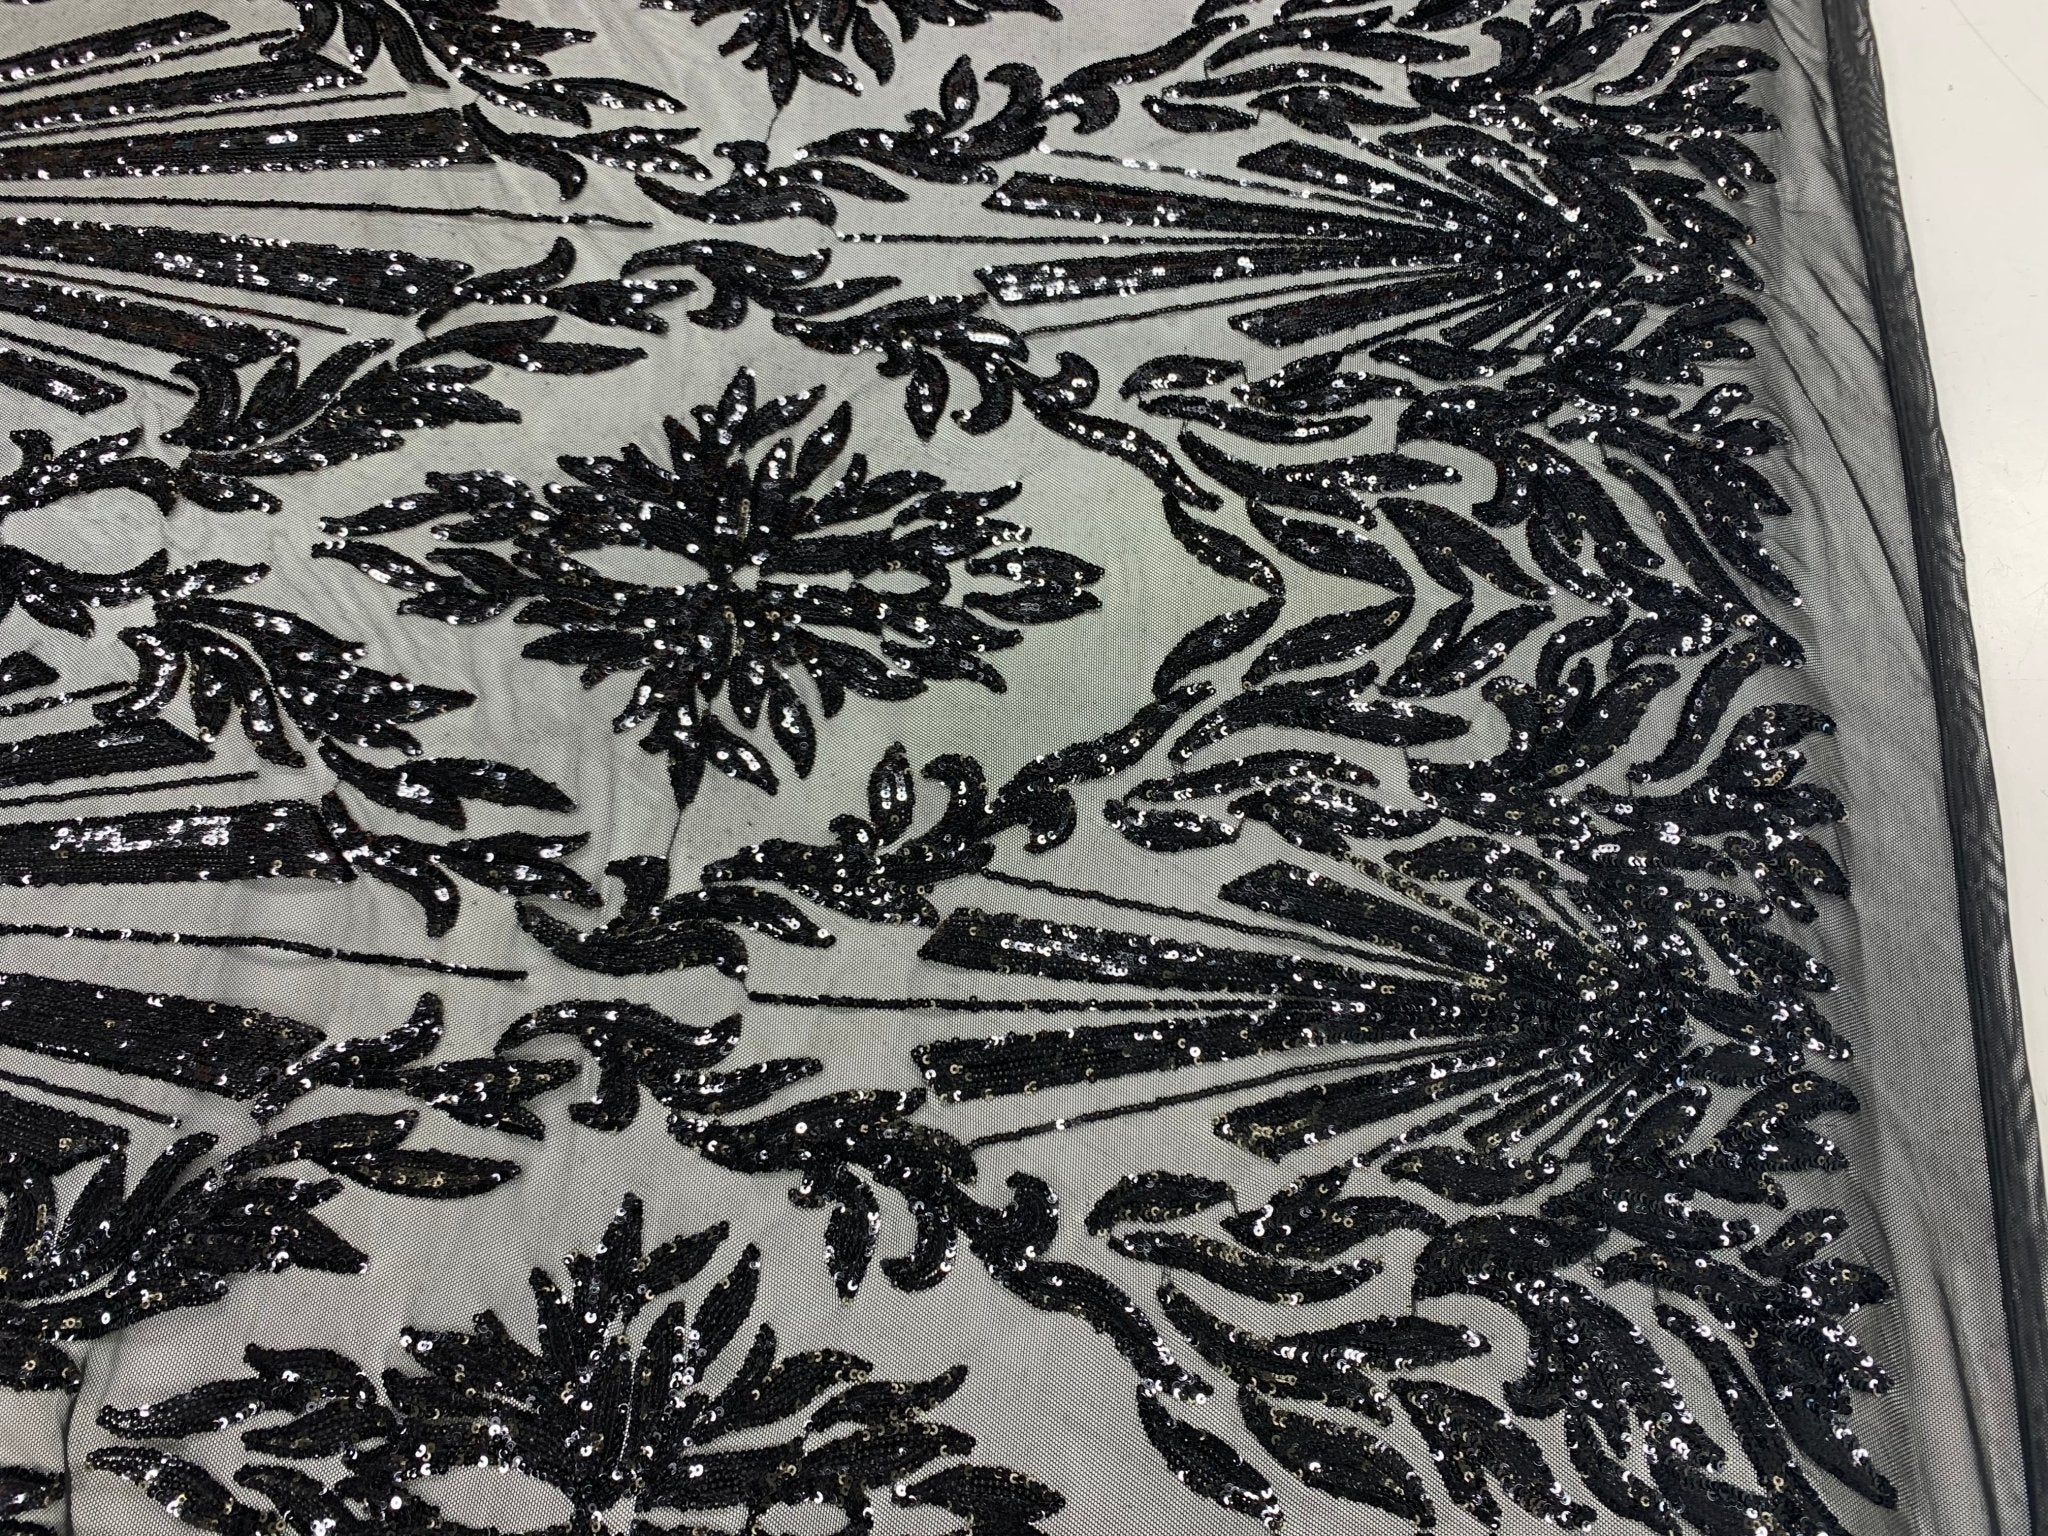 French Embroidery Stretch Sequins Fabric By The Yard on a Mesh LaceICEFABRICICE FABRICSBlack on Black MeshFrench Embroidery Stretch Sequins Fabric By The Yard on a Mesh Lace ICEFABRIC Black on Black Mesh